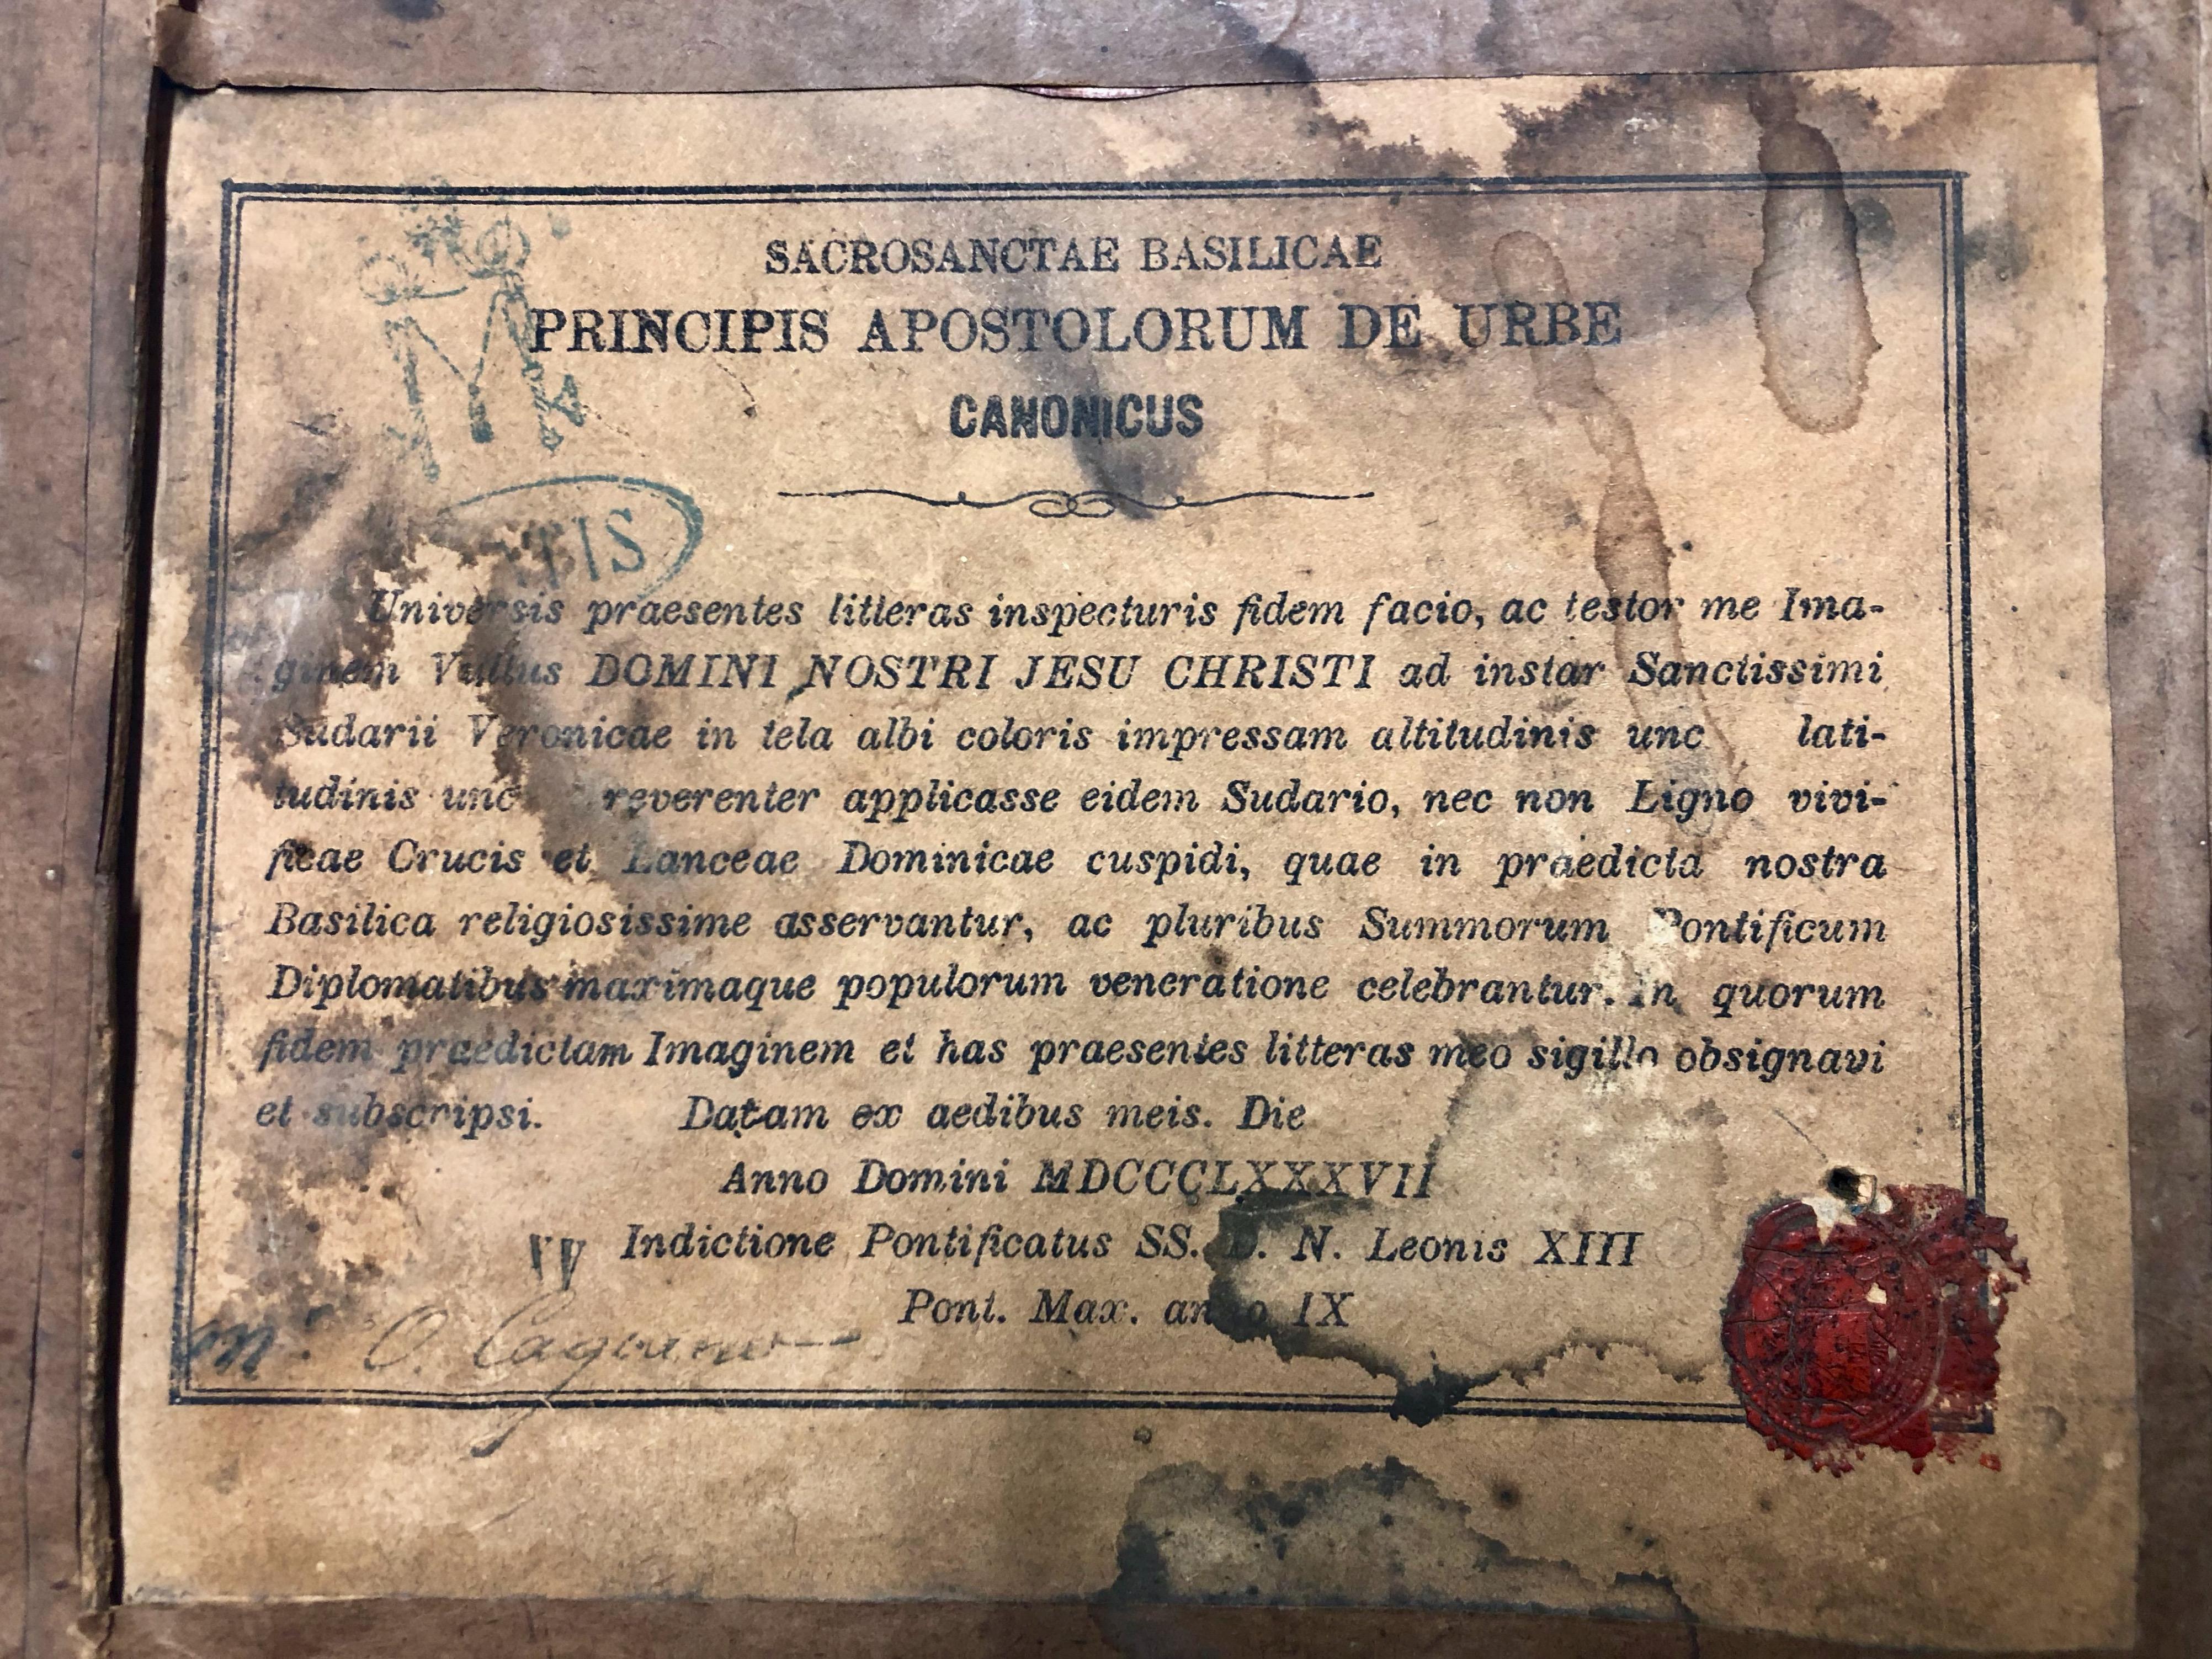 French Framed Relic Image of Veronica's Veil, with Vatican Seal and Stamp, Verso